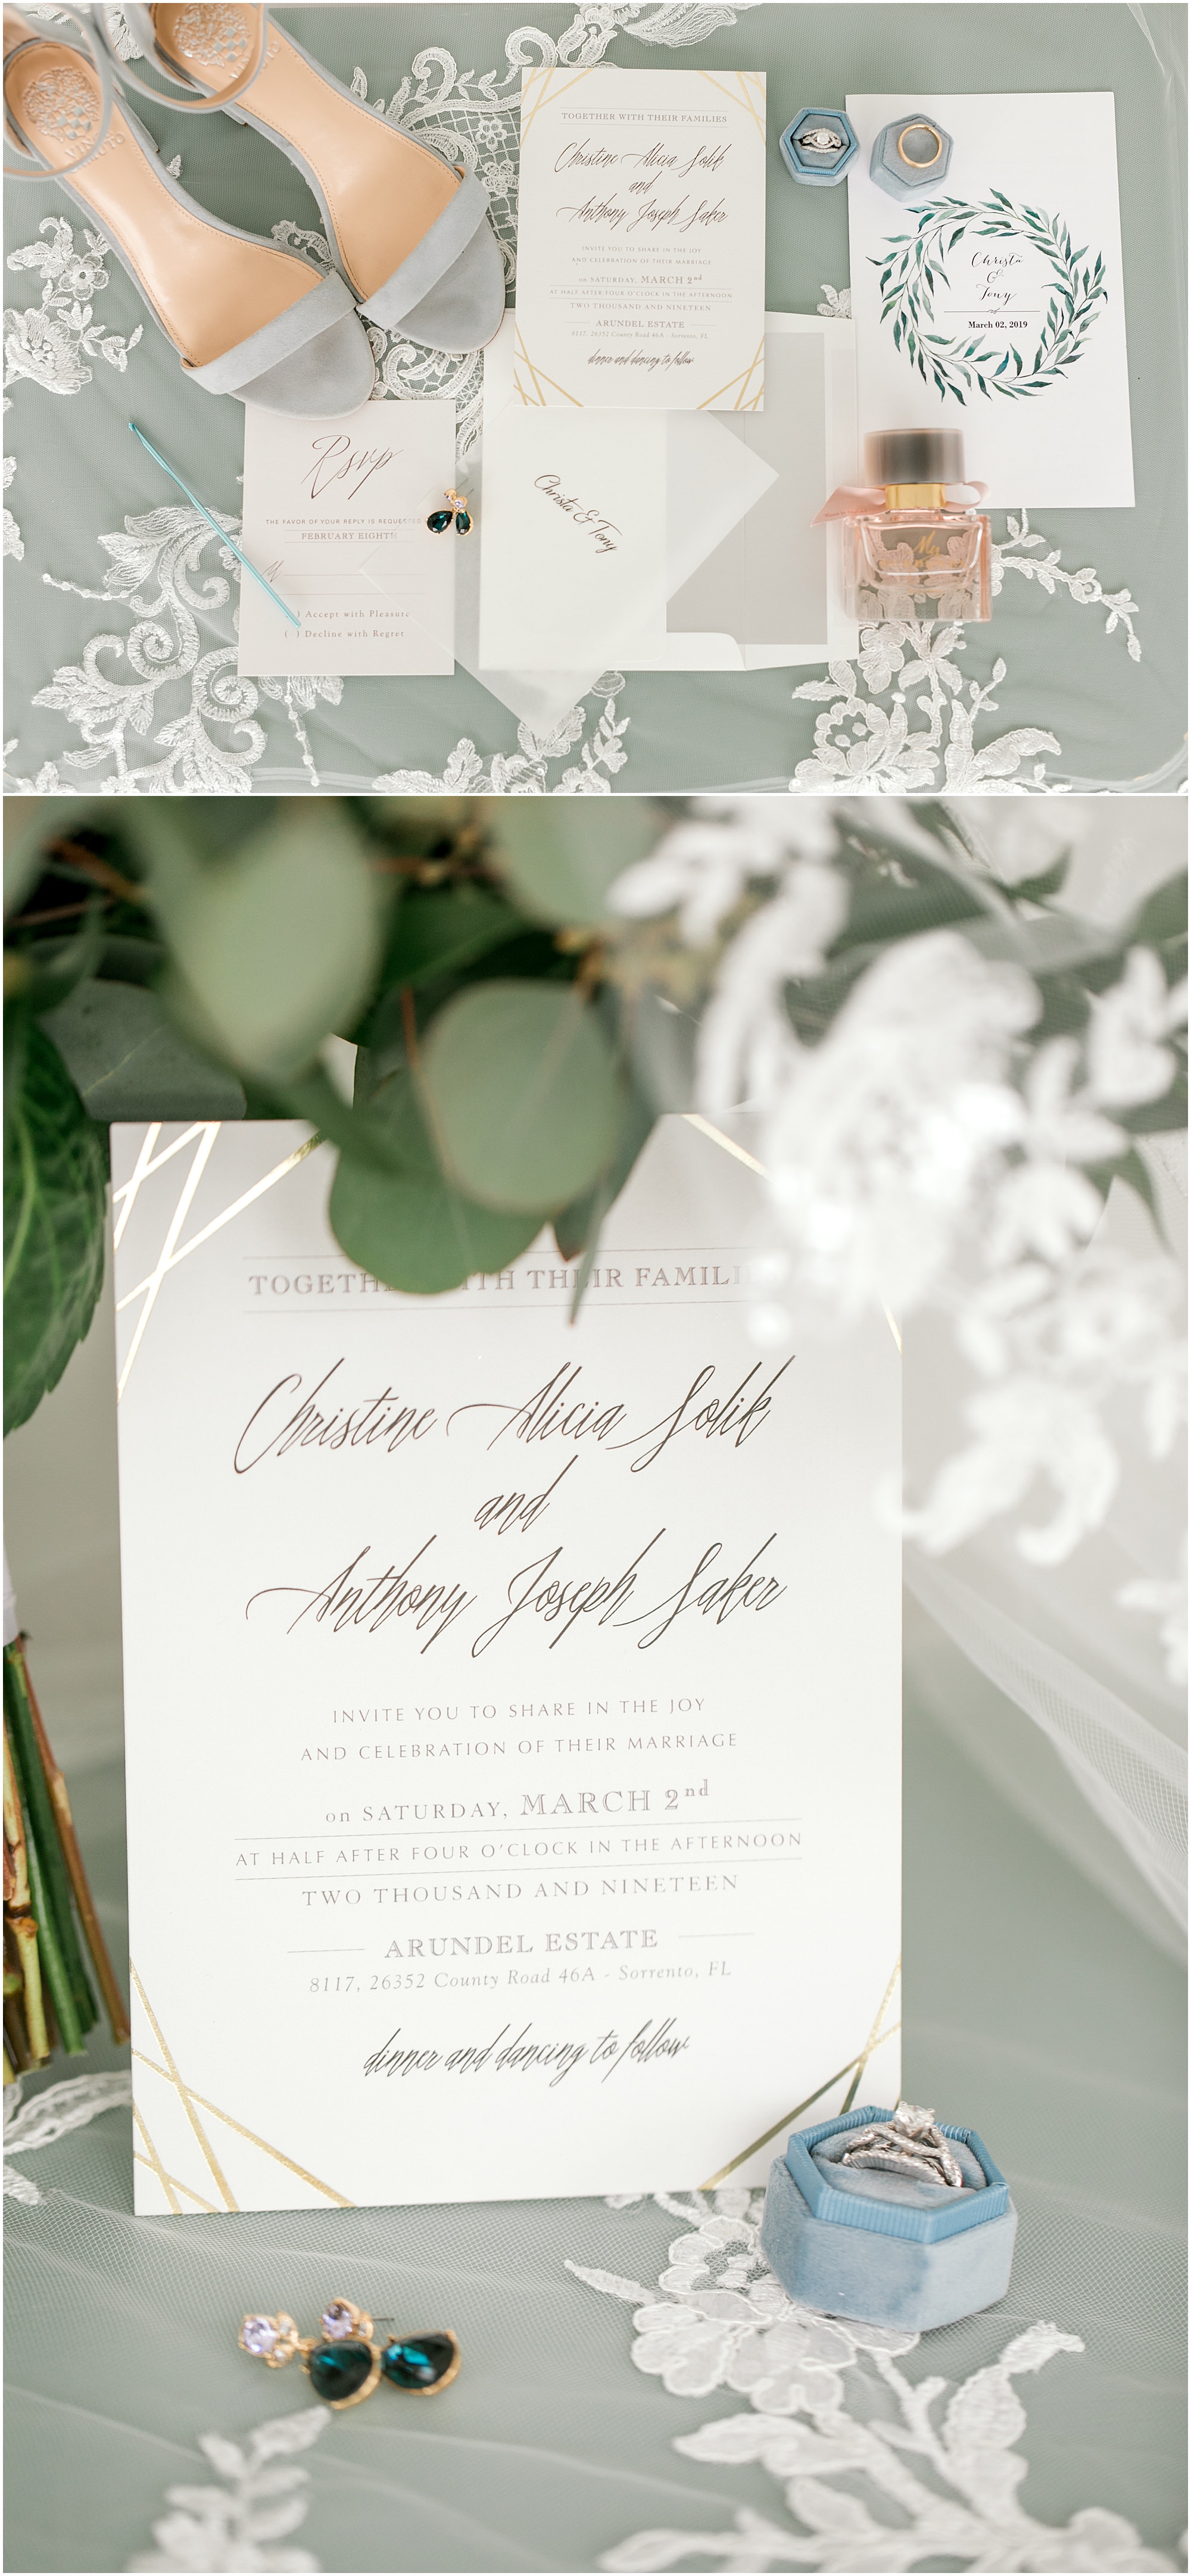 Invitation set from Minted company and other southern wedding bridal details